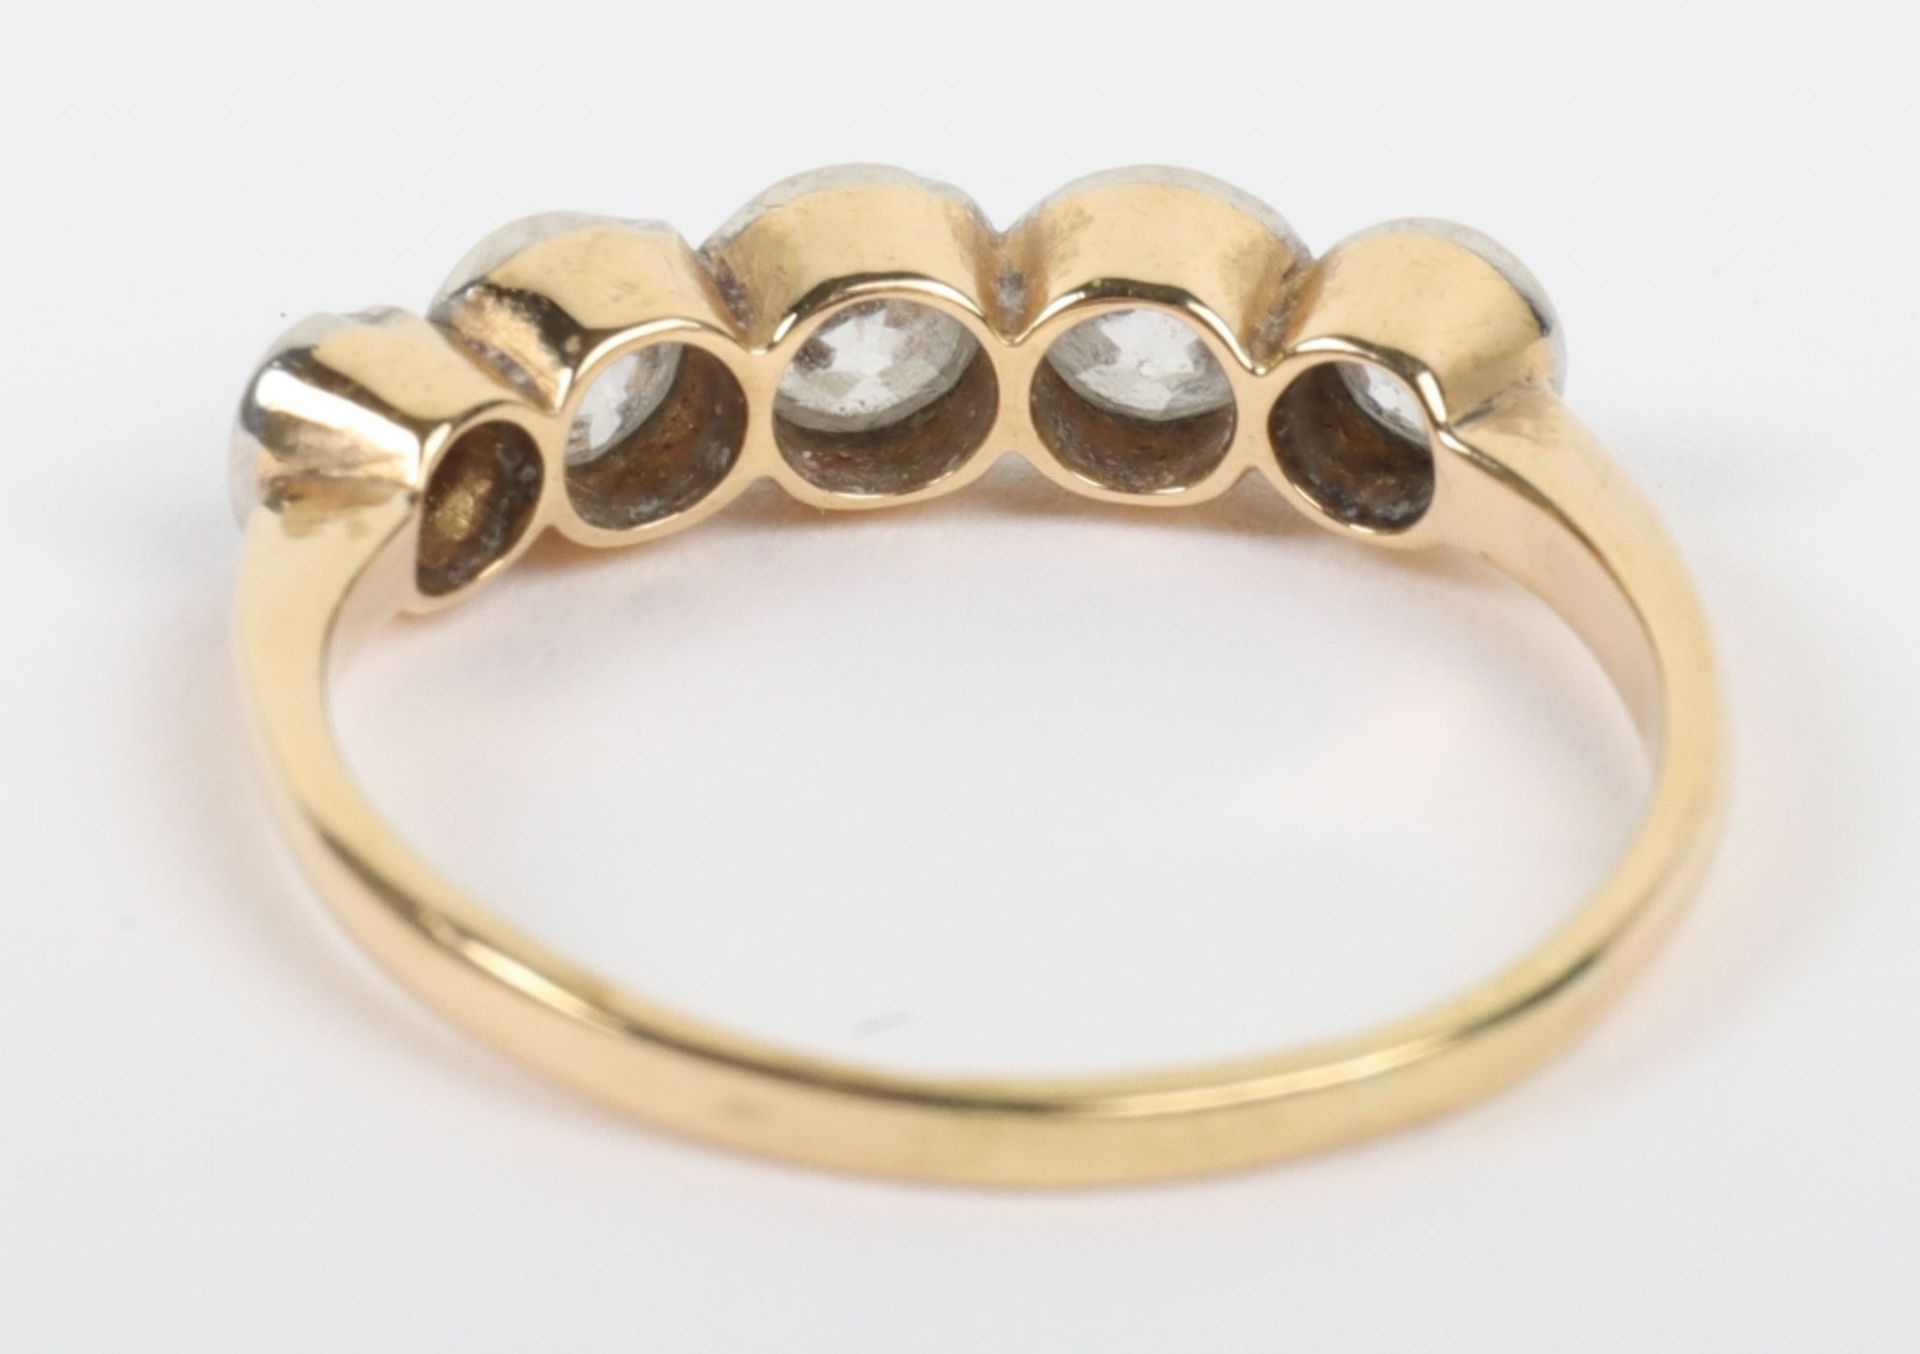 Early 20th century 18ct gold and five stone diamond ring - Image 5 of 5